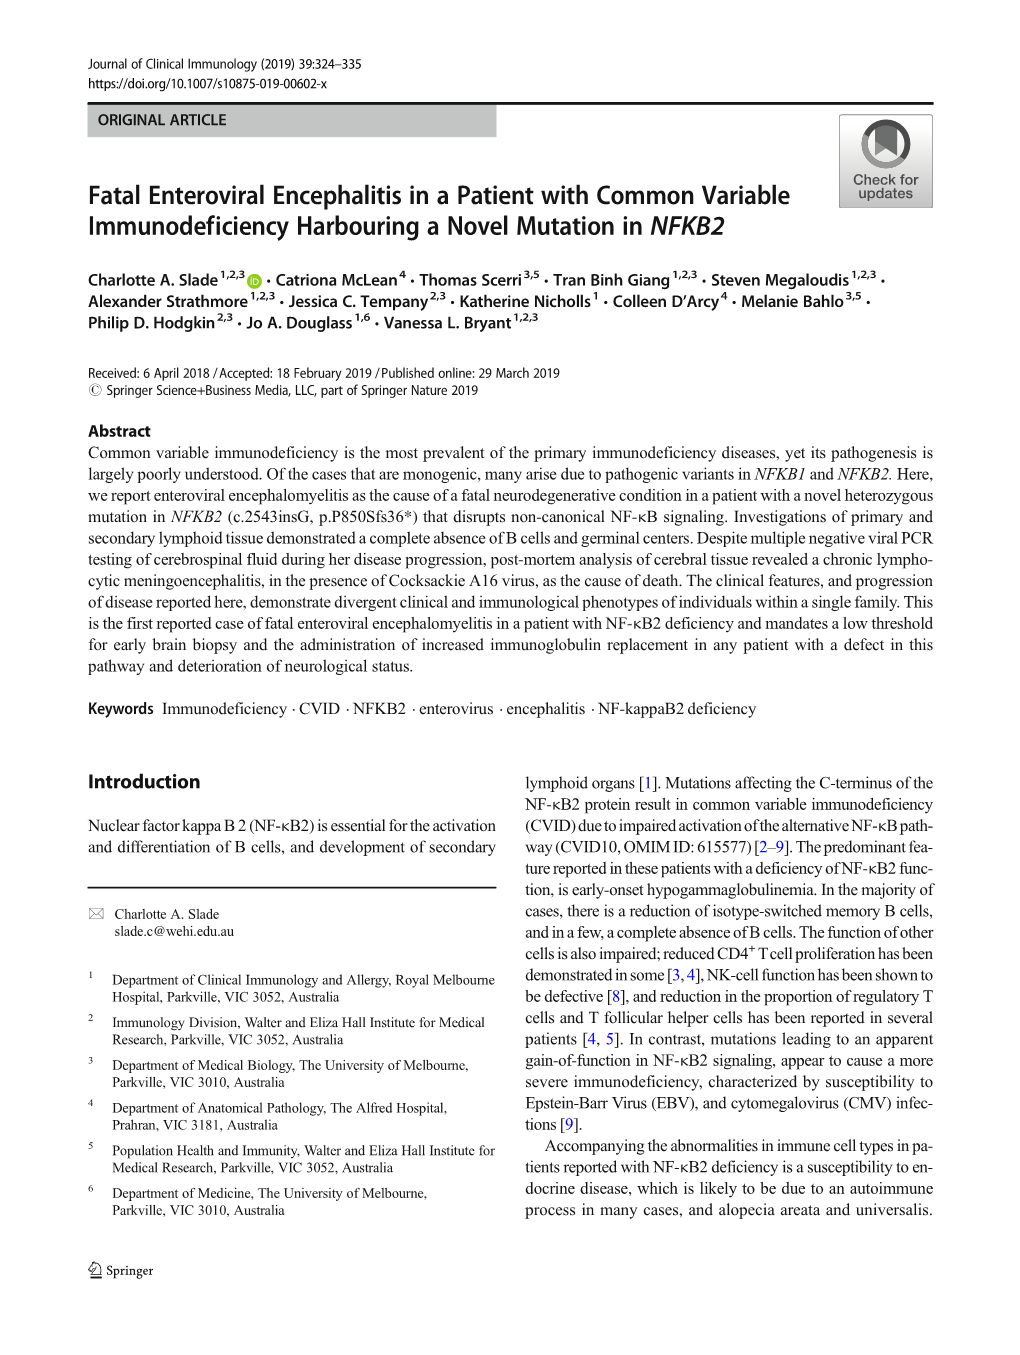 Fatal Enteroviral Encephalitis in a Patient with Common Variable Immunodeficiency Harbouring a Novel Mutation in NFKB2